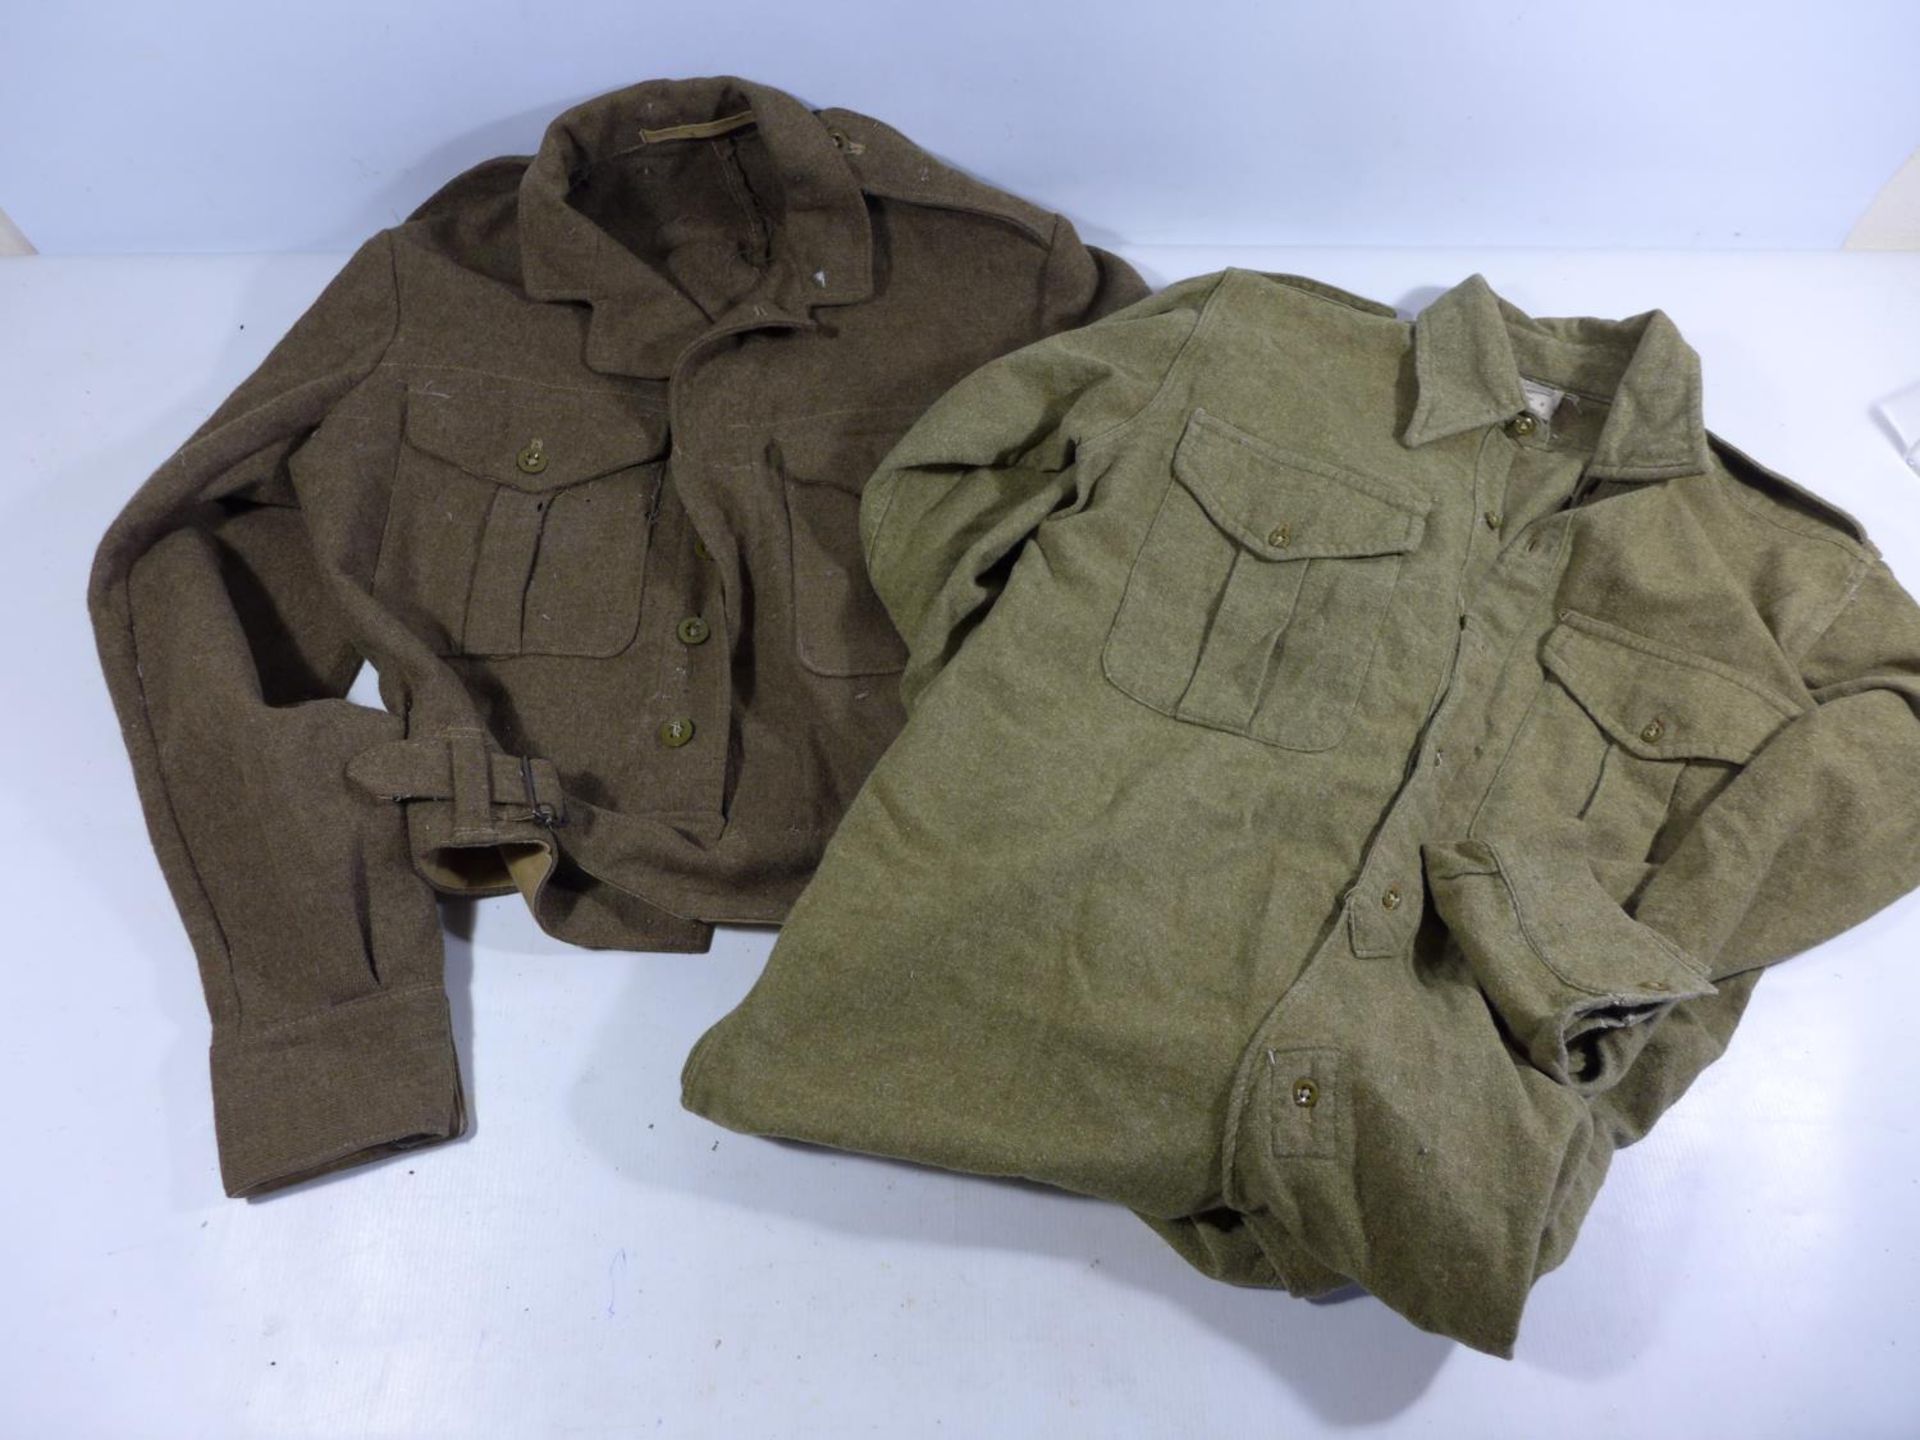 A COLLECTION OF BRITISH ARMY BATTLE DRESS, CAMOUFLAGE SHORTS, USA SHIRT